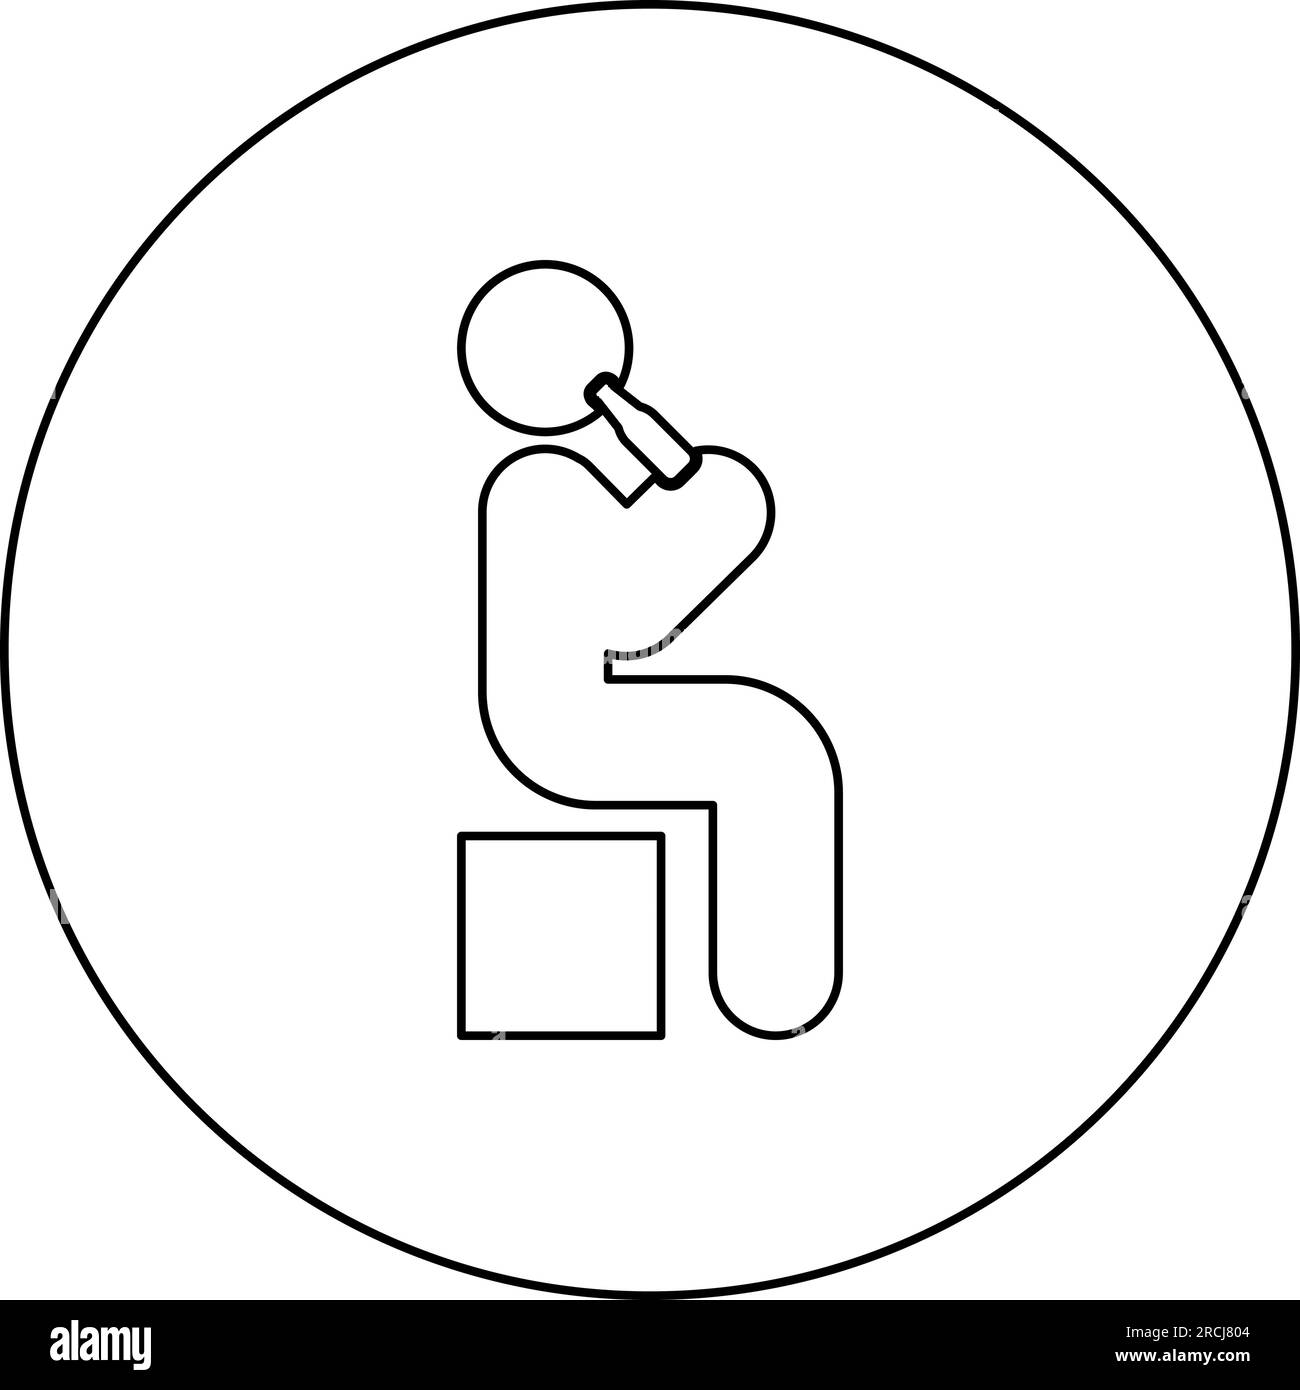 Man human drinking water alcohol beer from bottle sitting position icon in circle round black color vector illustration image outline contour line Stock Vector